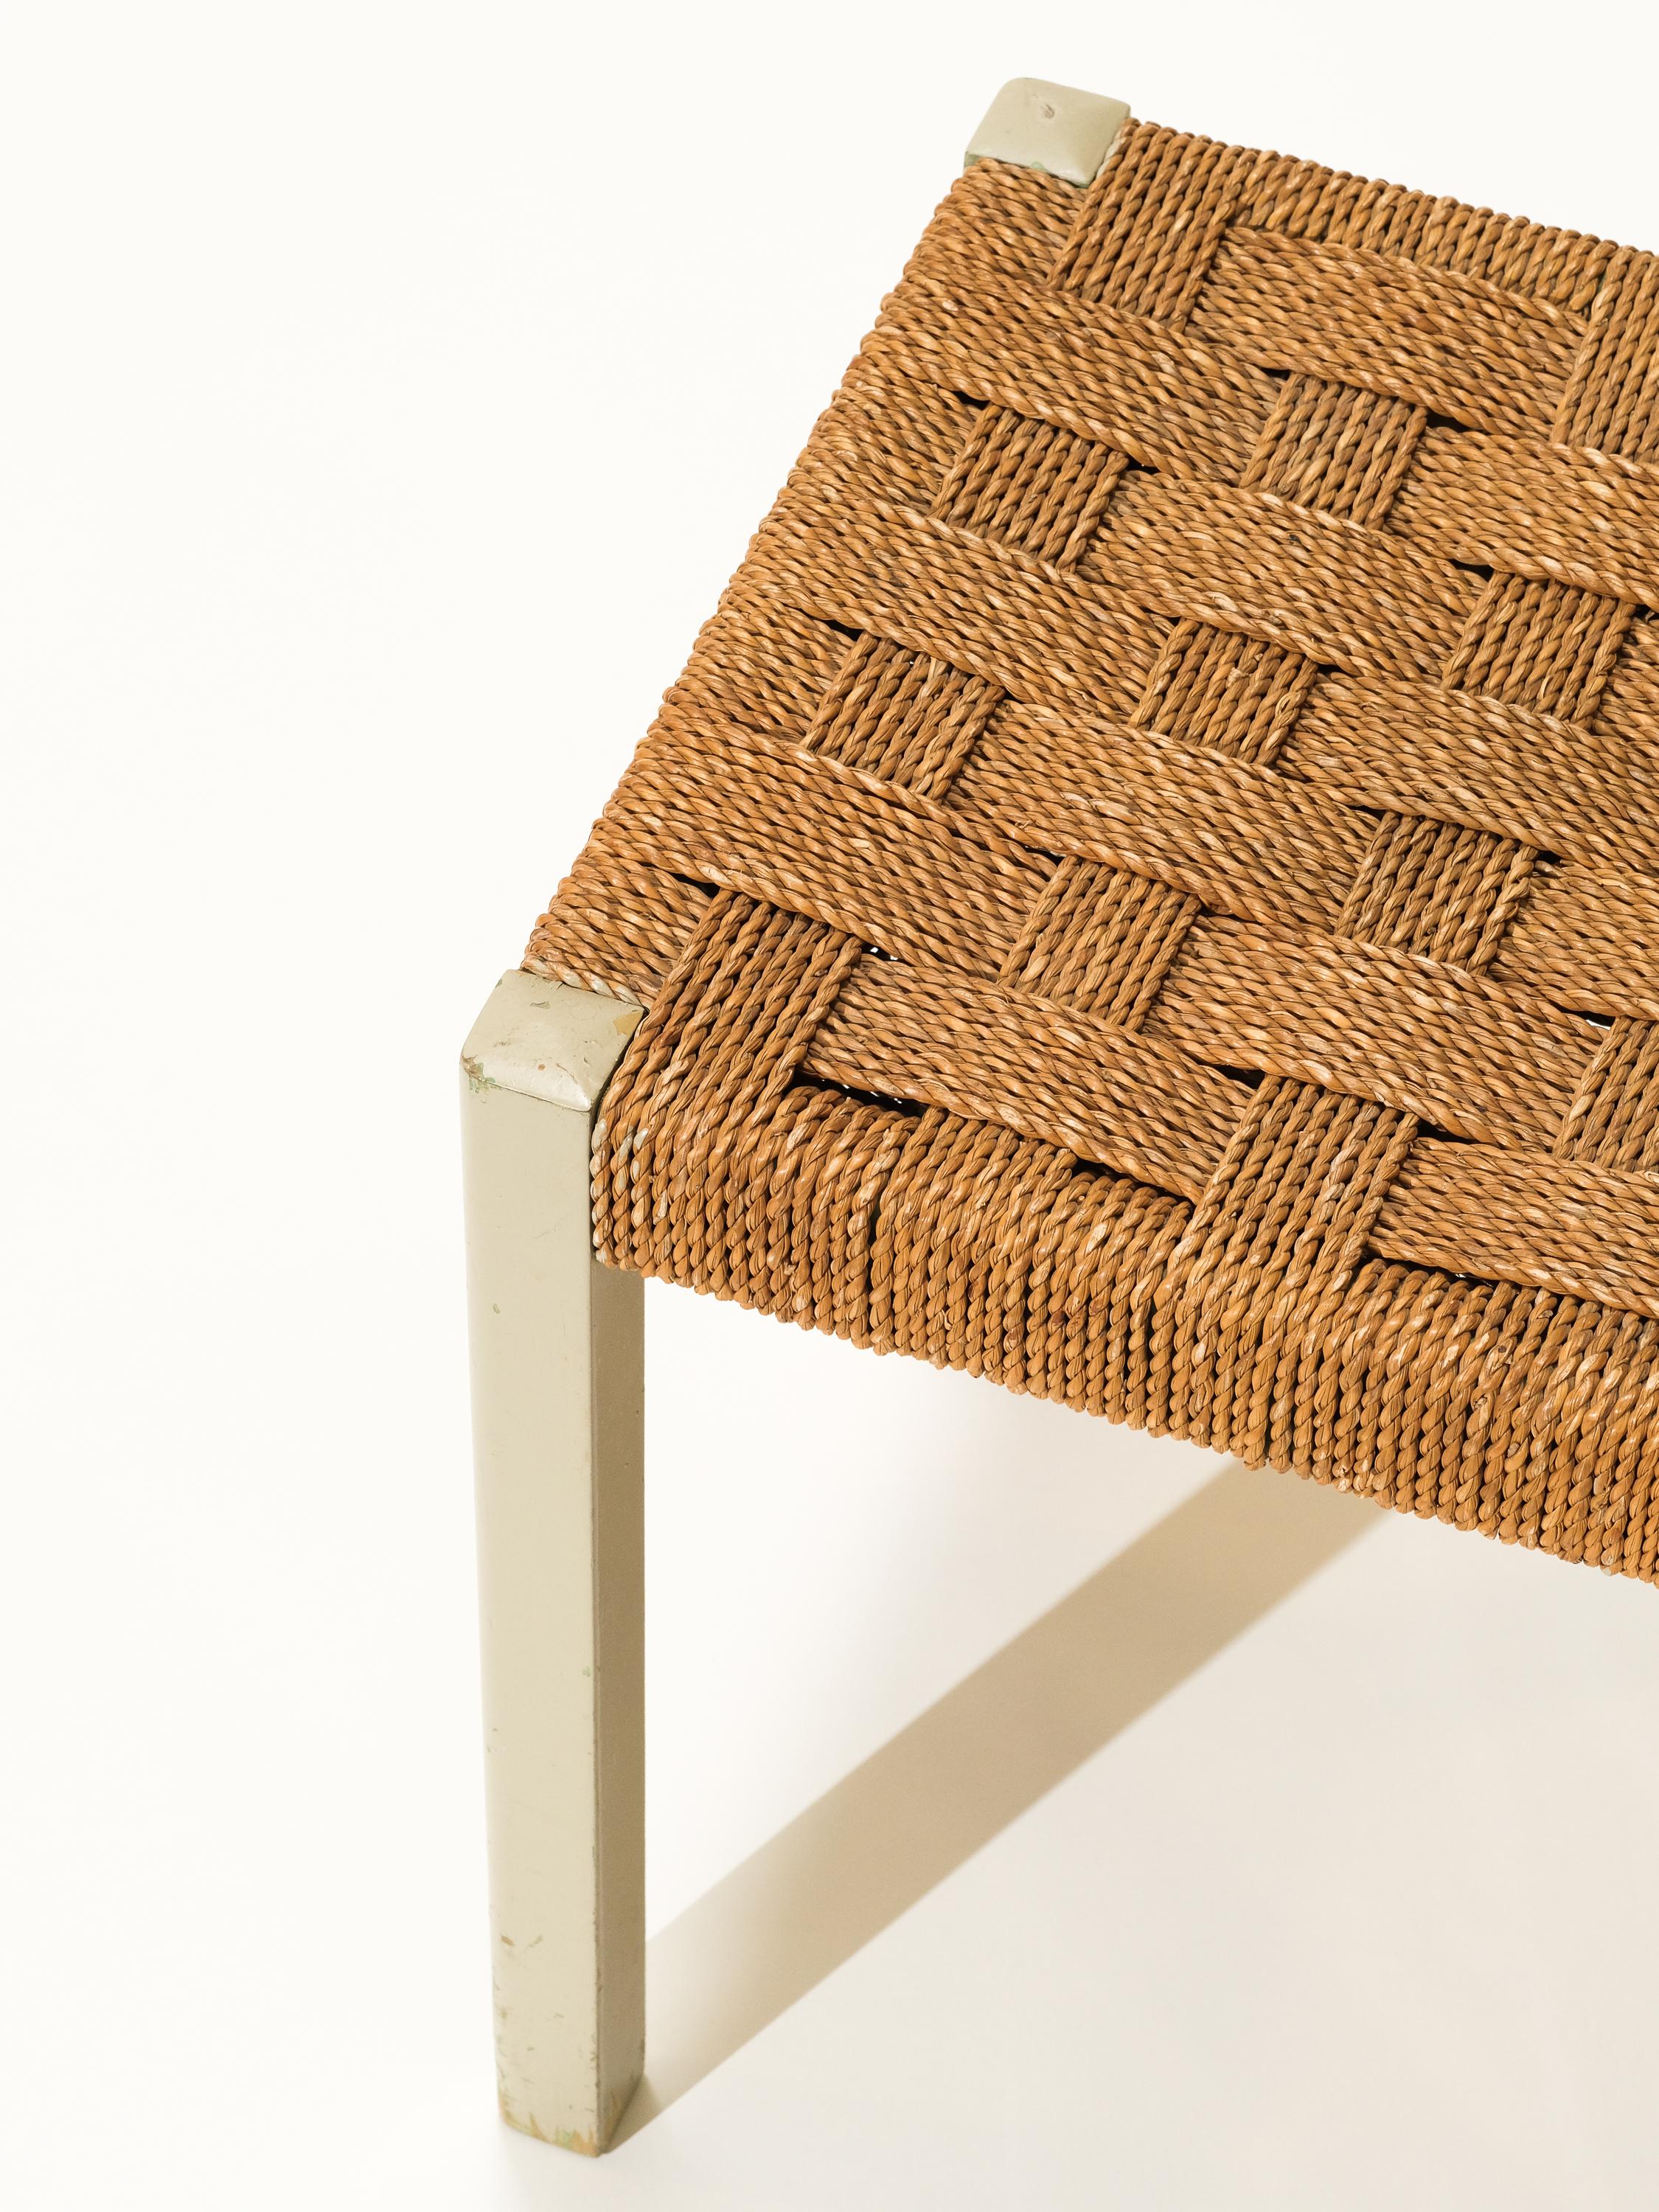 Scandinavian Modern Woven Seagrass and Painted Wood Stool by Axel Larsson for Gemla, Sweden, 1940s For Sale